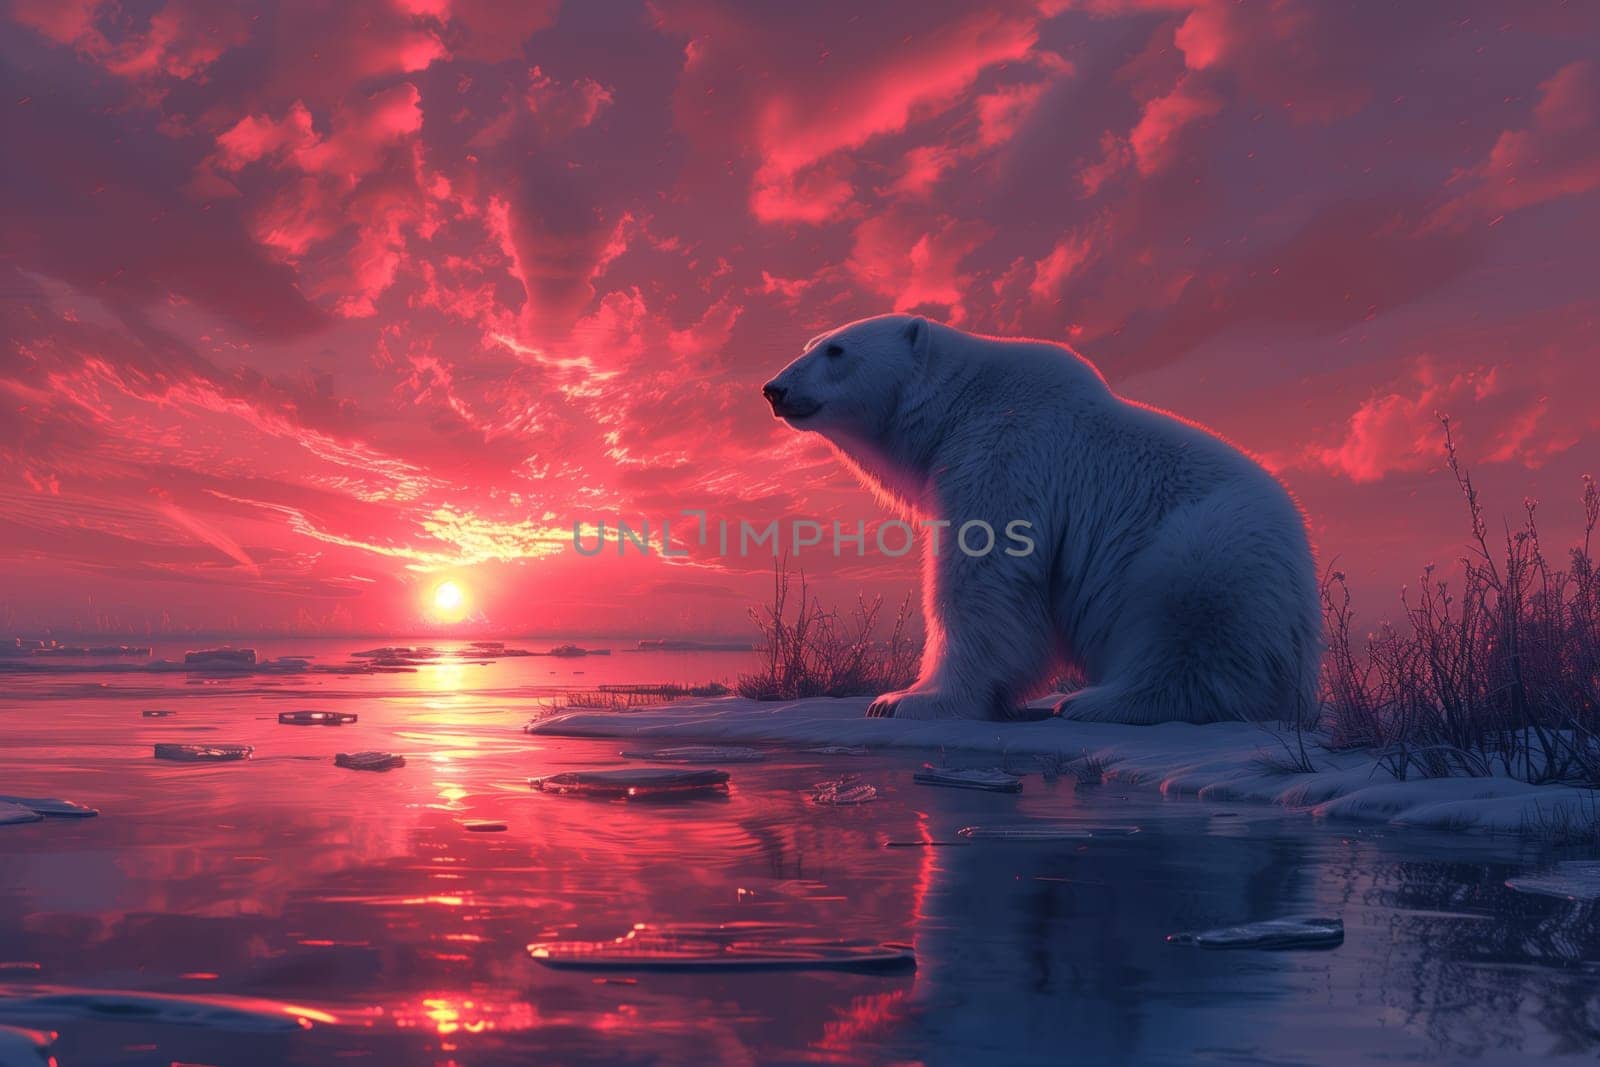 Polar bear watching sunset on ice, with sky, water, and horizon in view by richwolf